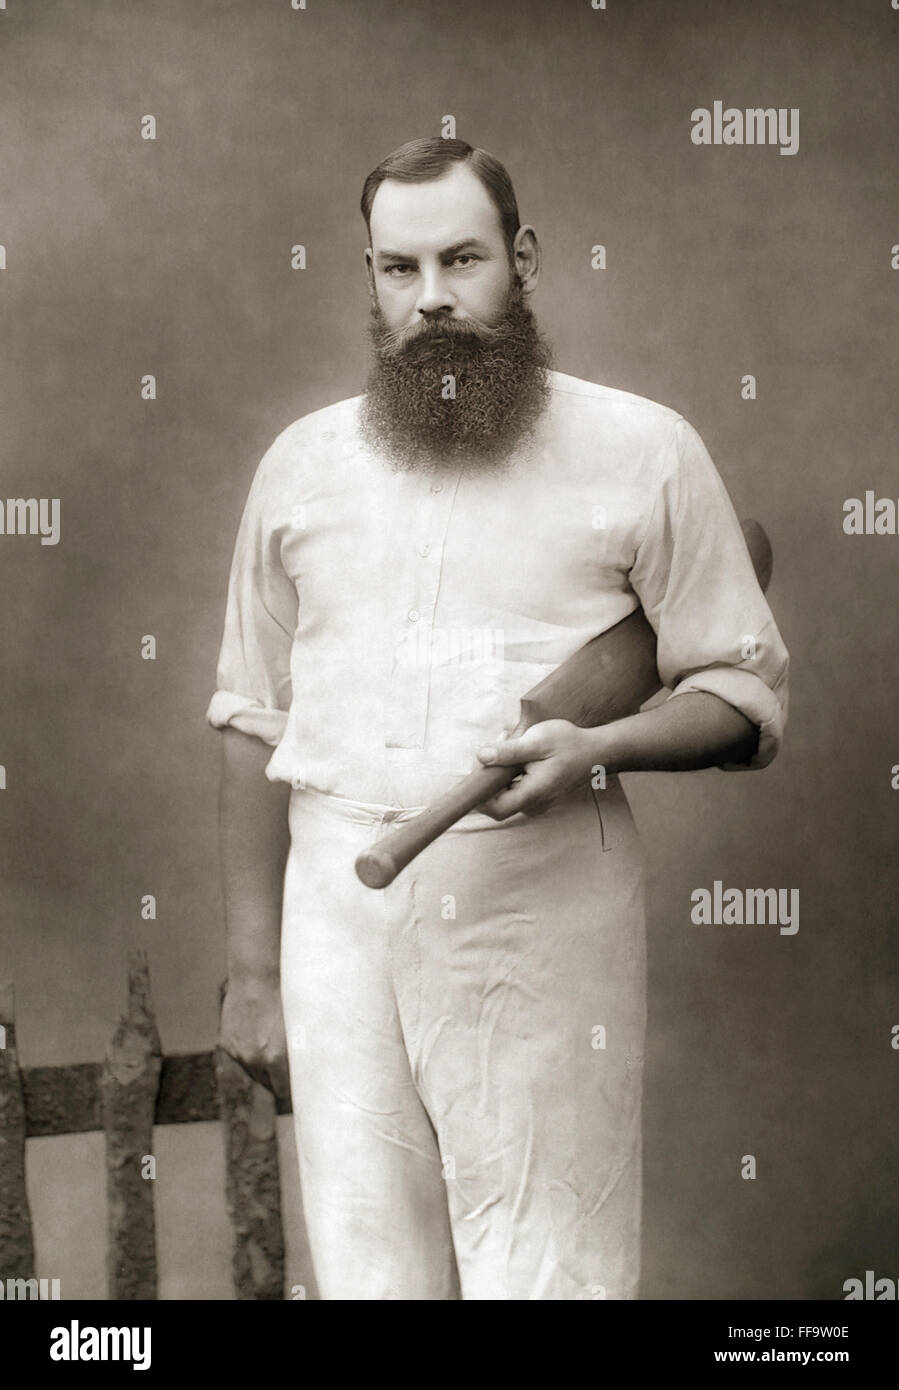 WILLIAM GILBERT GRACE /n(1848-1915). English cricketer. Photographed in 1888. Stock Photo